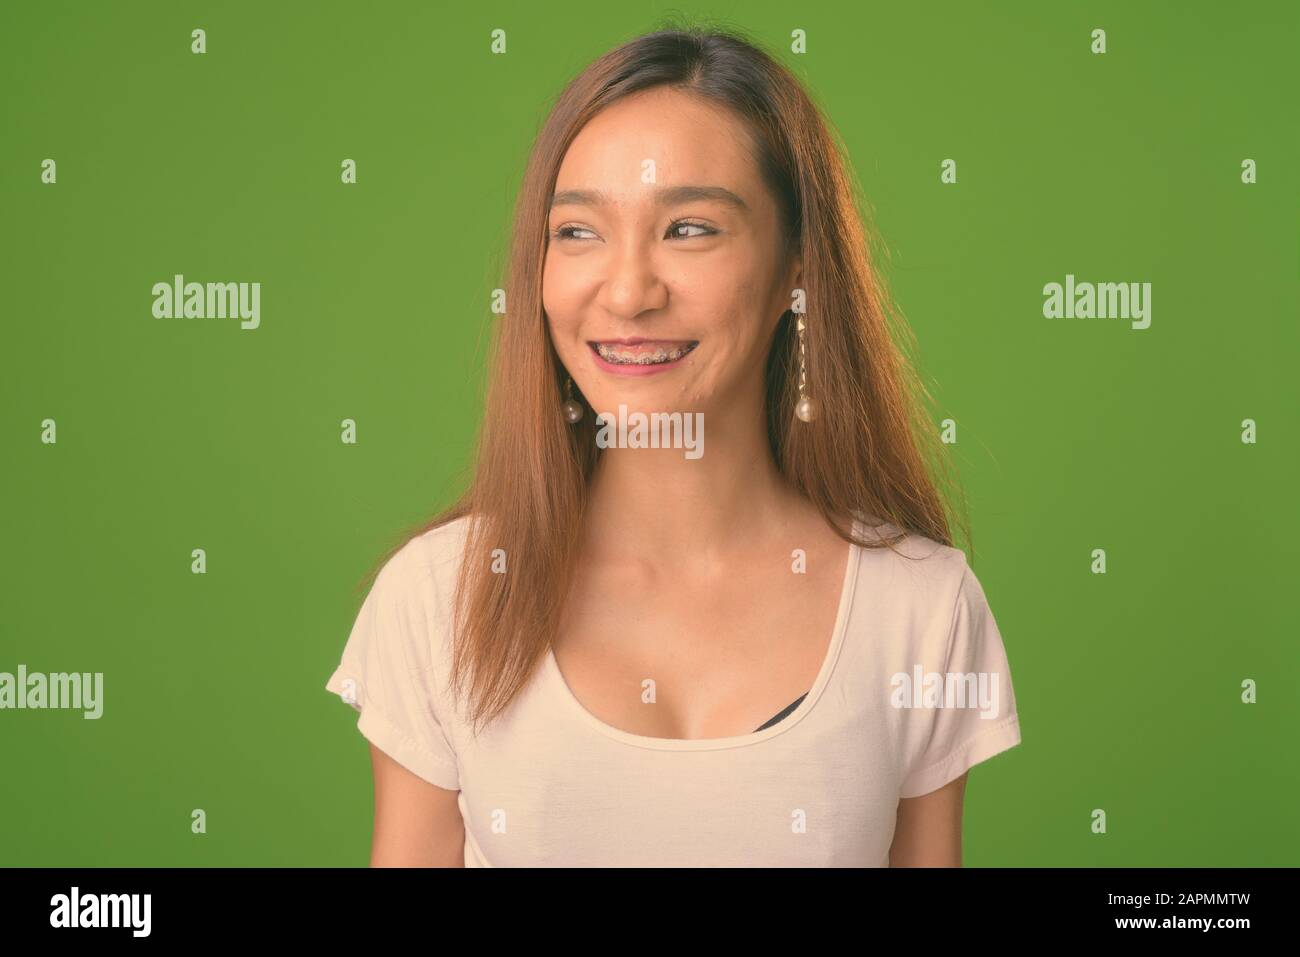 Young slim Asian woman against green background Stock Photo